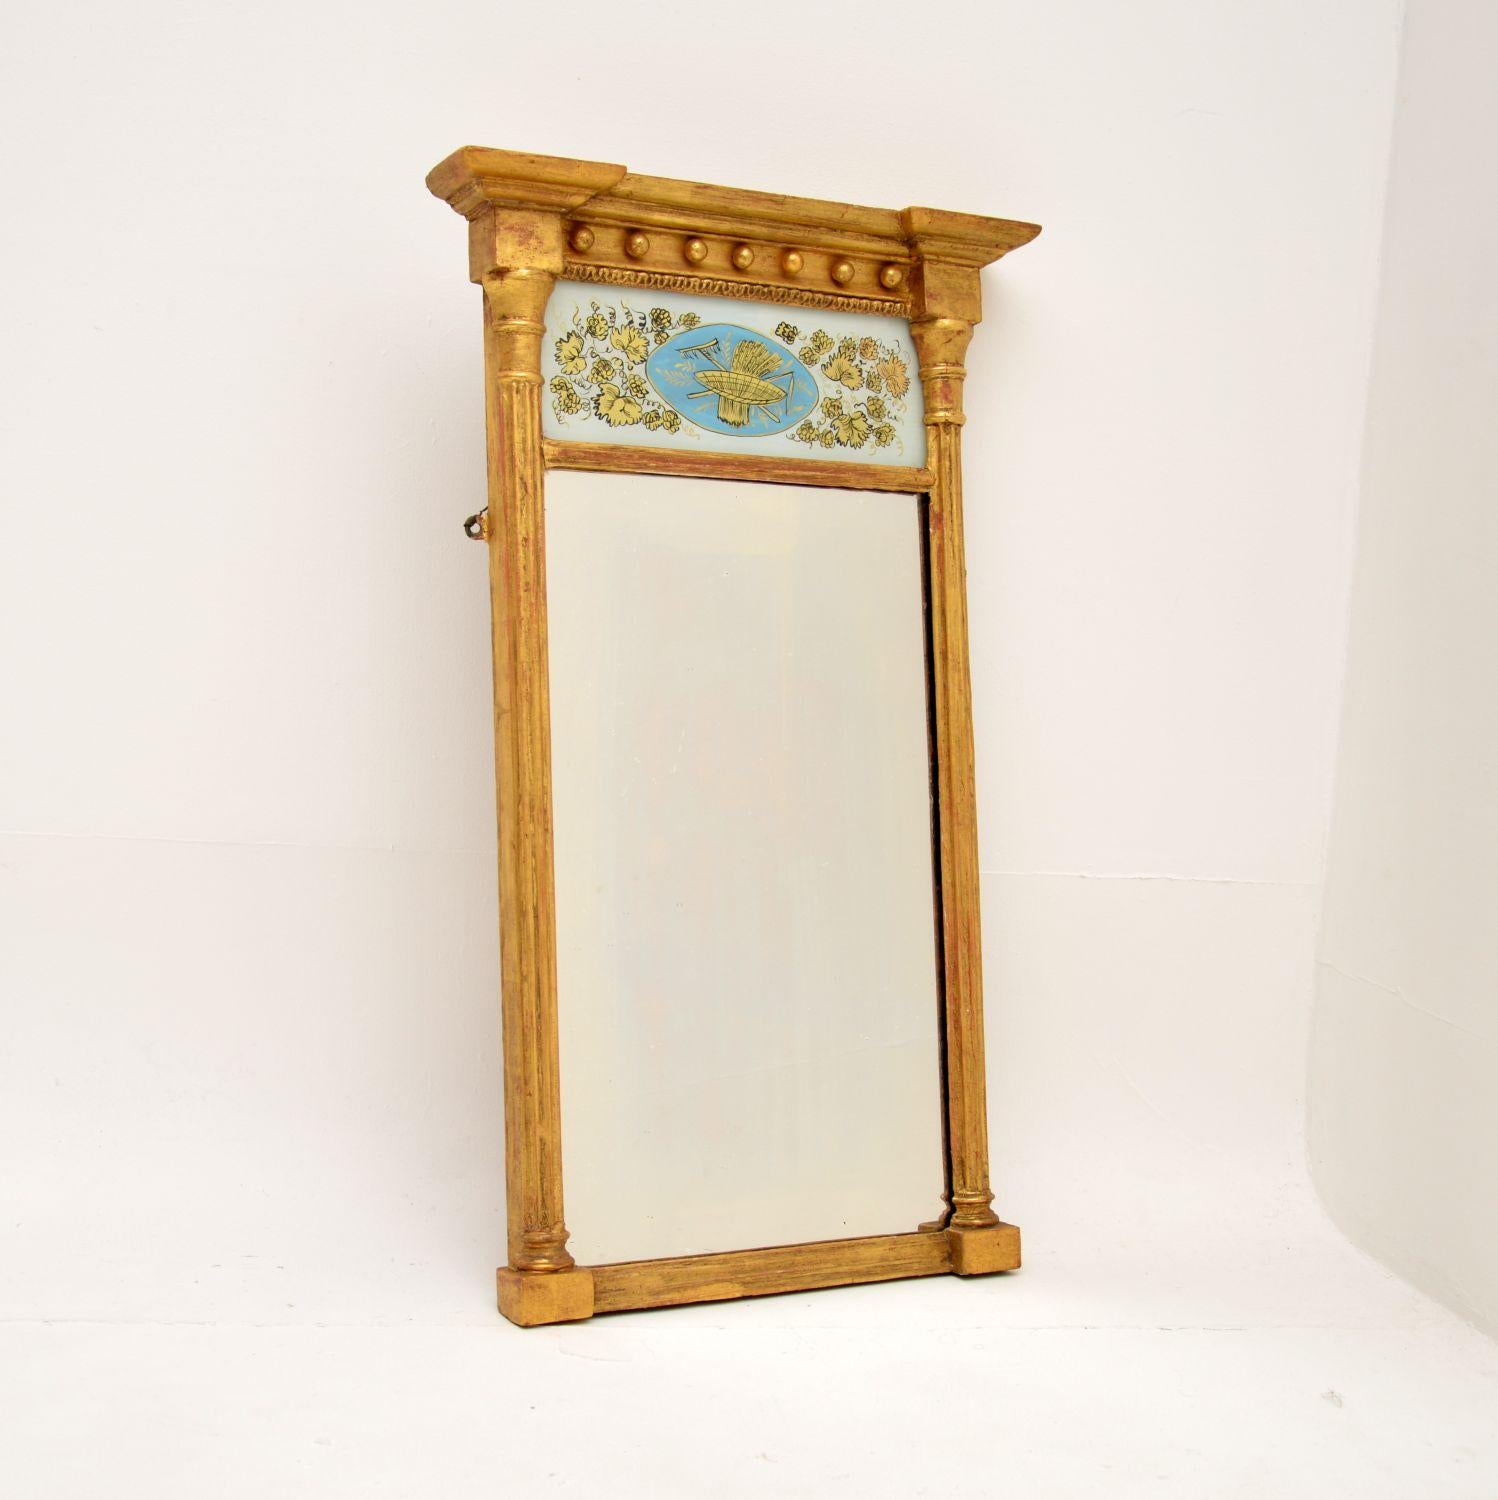 A smart and very well made antique Regency gilt wood mirror. This was made in England, it dates from around the 1800-1820 period.

It is of lovely quality and is a very useful size. The gilt wood has a fantastic patina, there are lovely details and